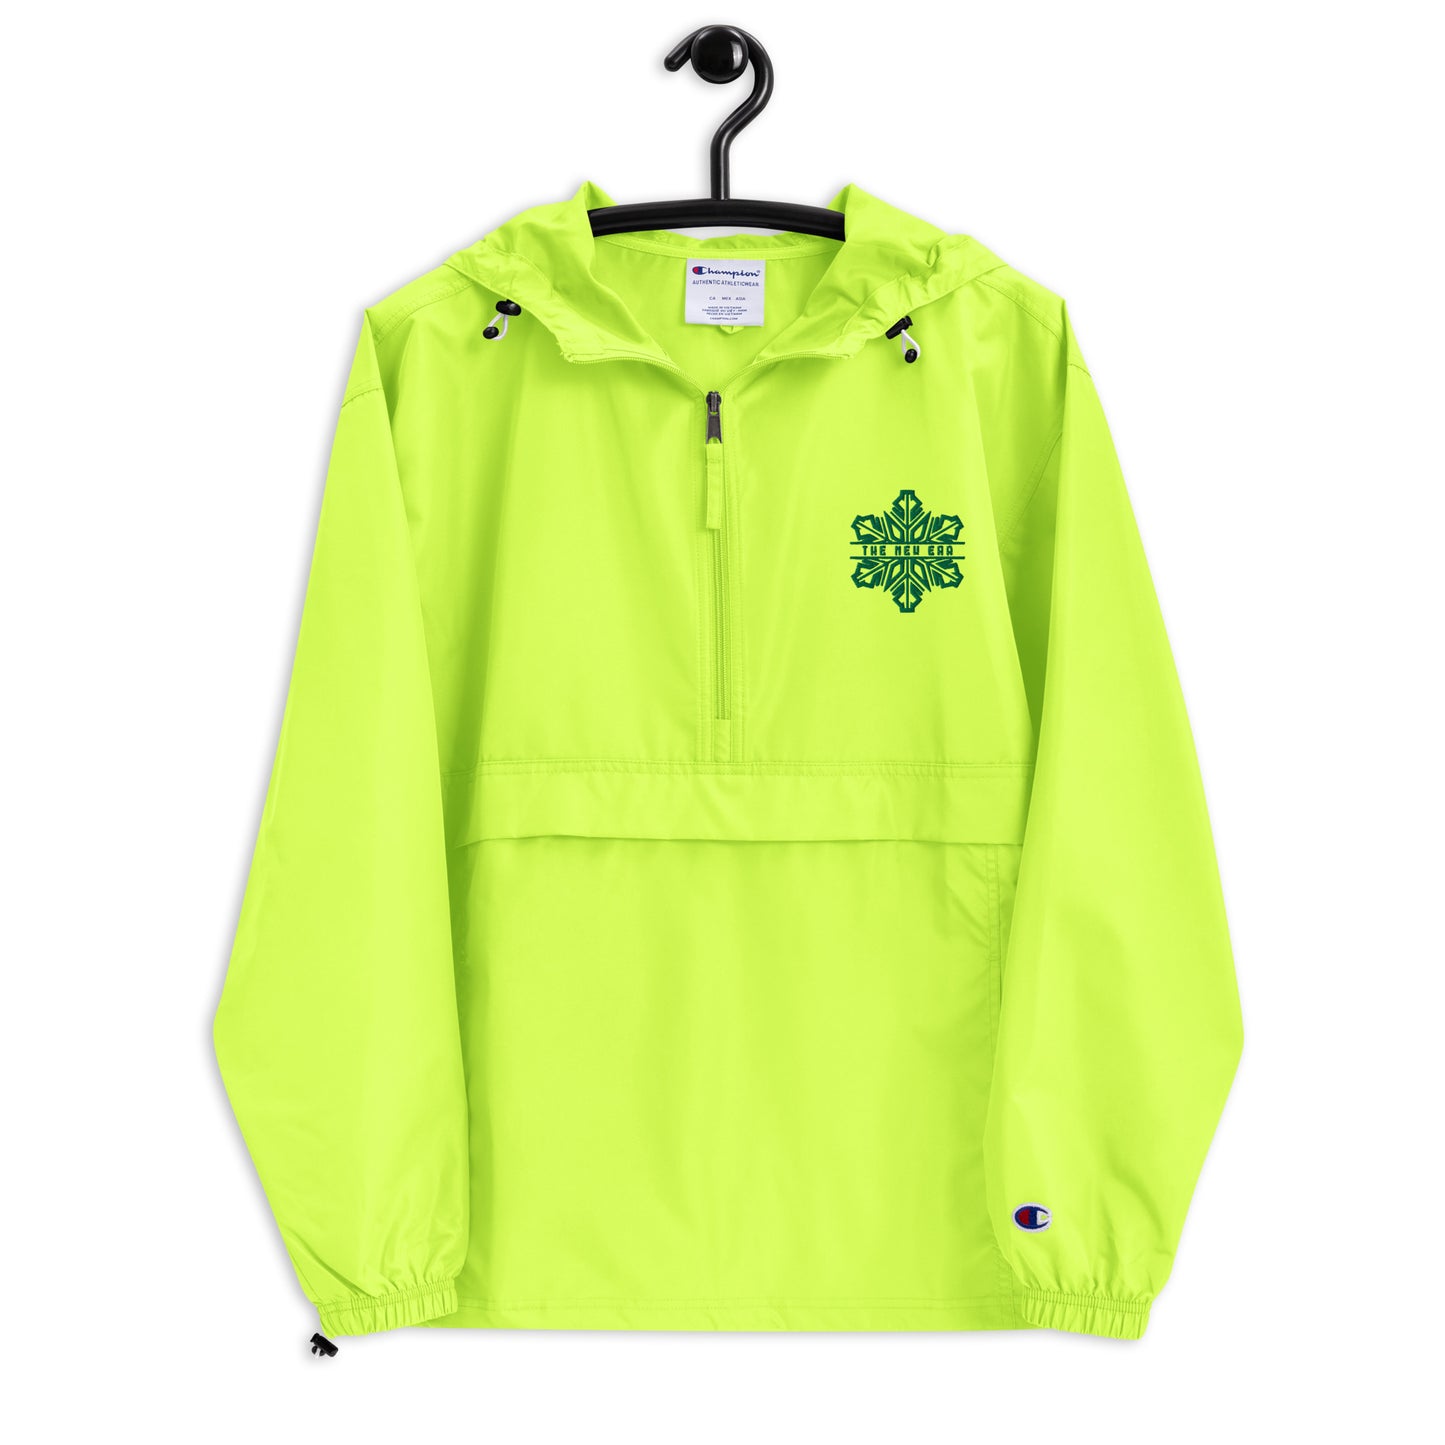 Unisex "The New Era" Embroidered Champion Packable Jacket Green On Neon